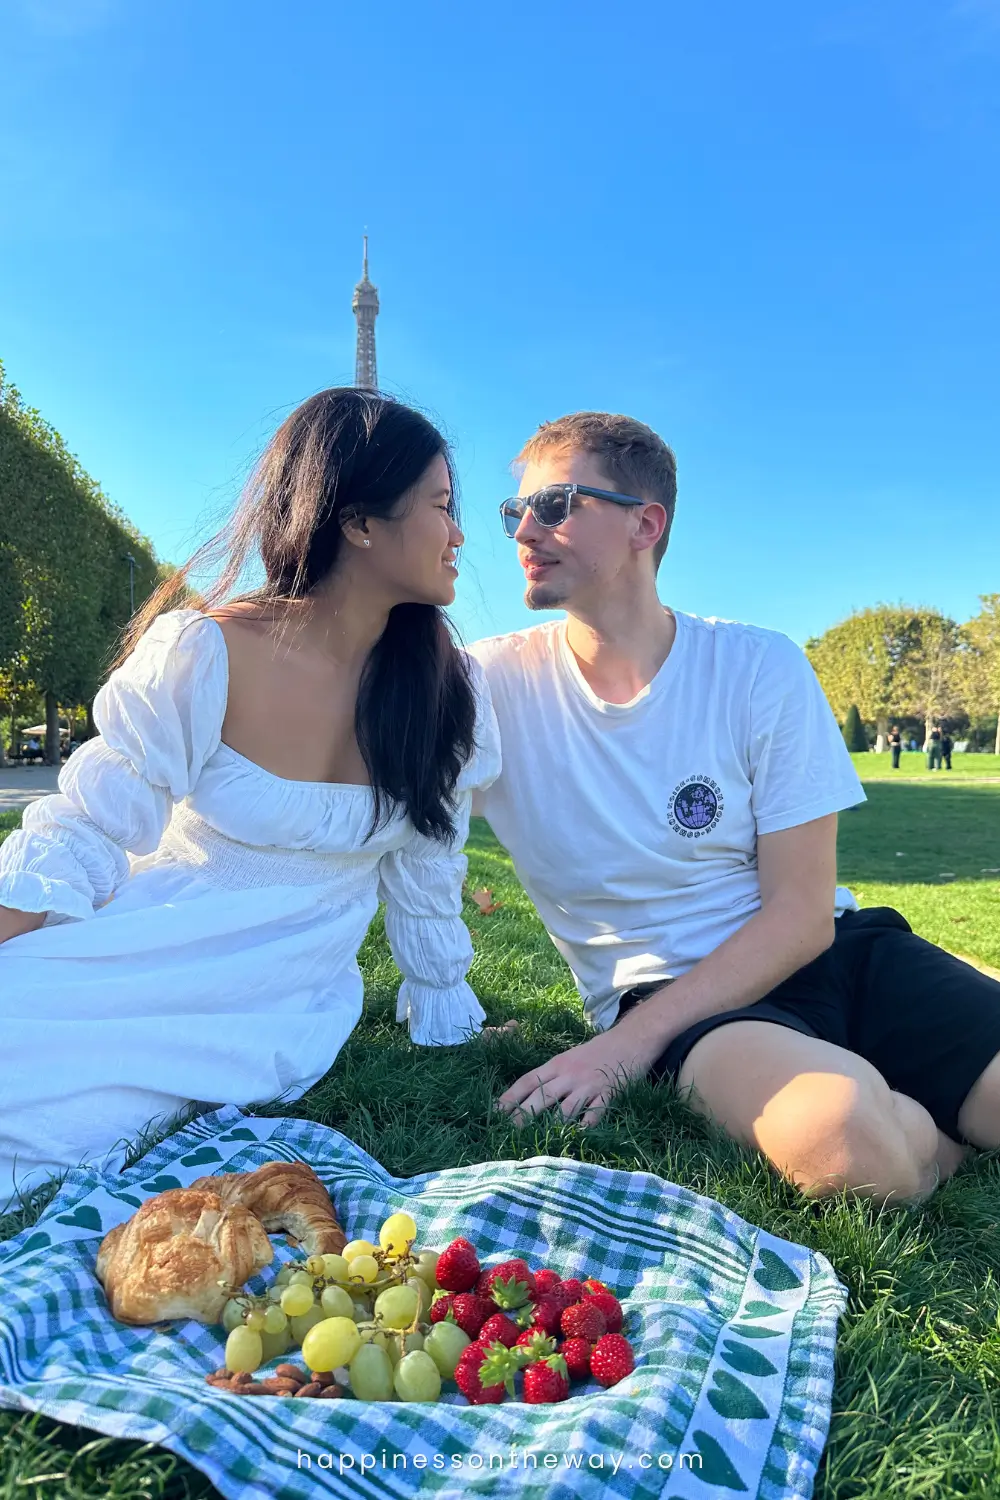 Me and Mat sharing a tender moment at a picnic at the Eiffel Tower, gazing into each other's eyes, with the woman dressed in a white puff-sleeved dress and the man in a casual white t-shirt and sunglasses. They're seated on the grass with a picnic setup featuring a croissant, grapes, strawberries, and almonds on a checkered cloth.